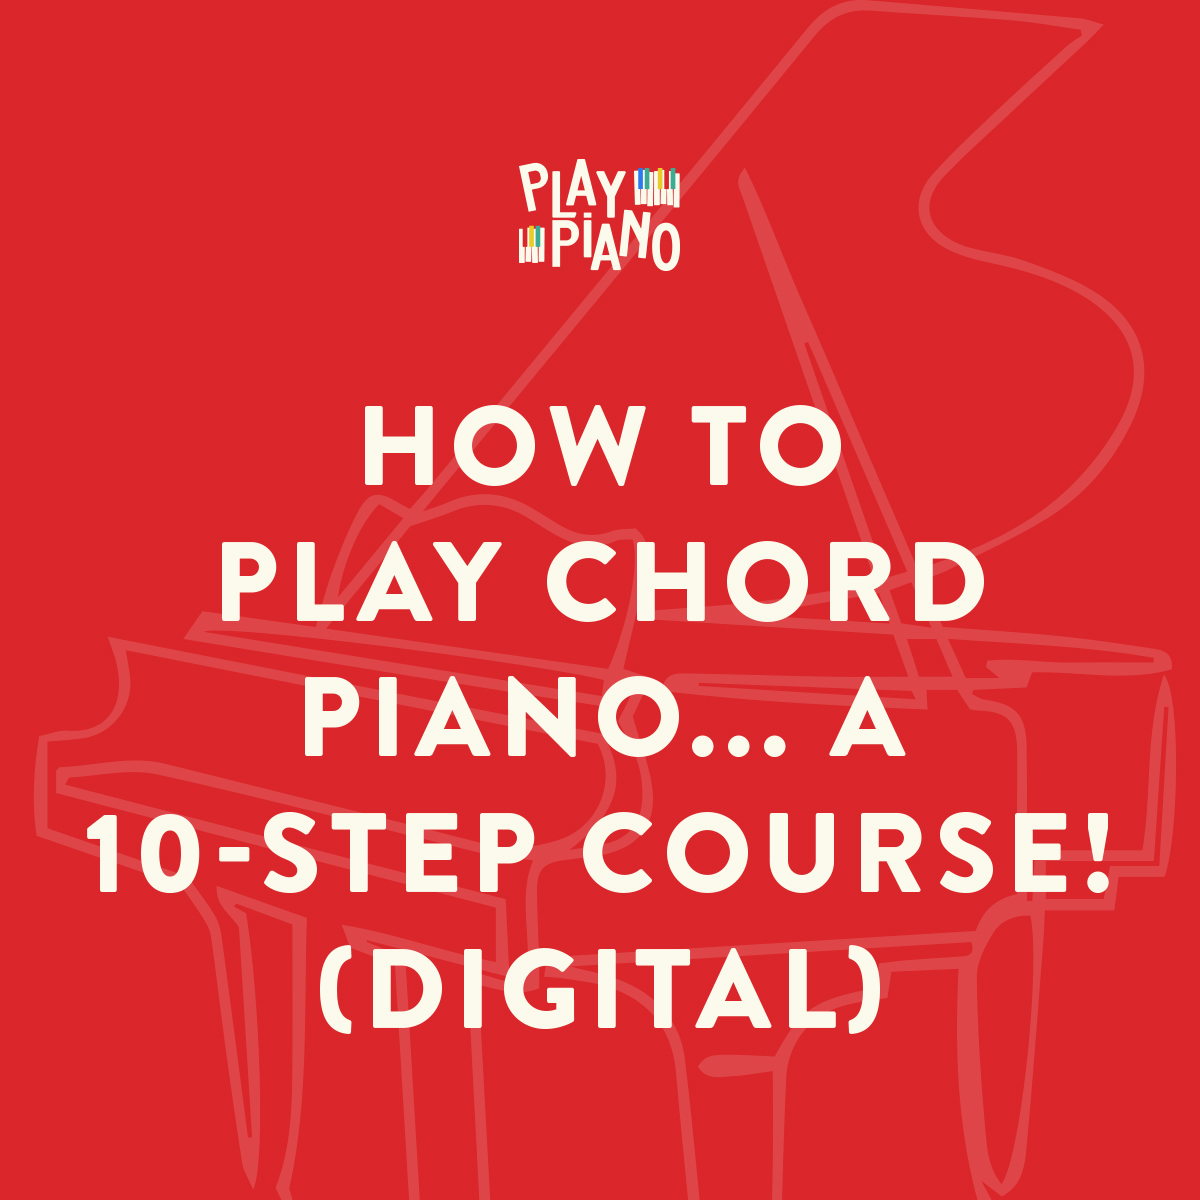 ørn auroch Forbrydelse How To Play Chord Piano... a 10-Step Course! (Digital) - PlayPiano